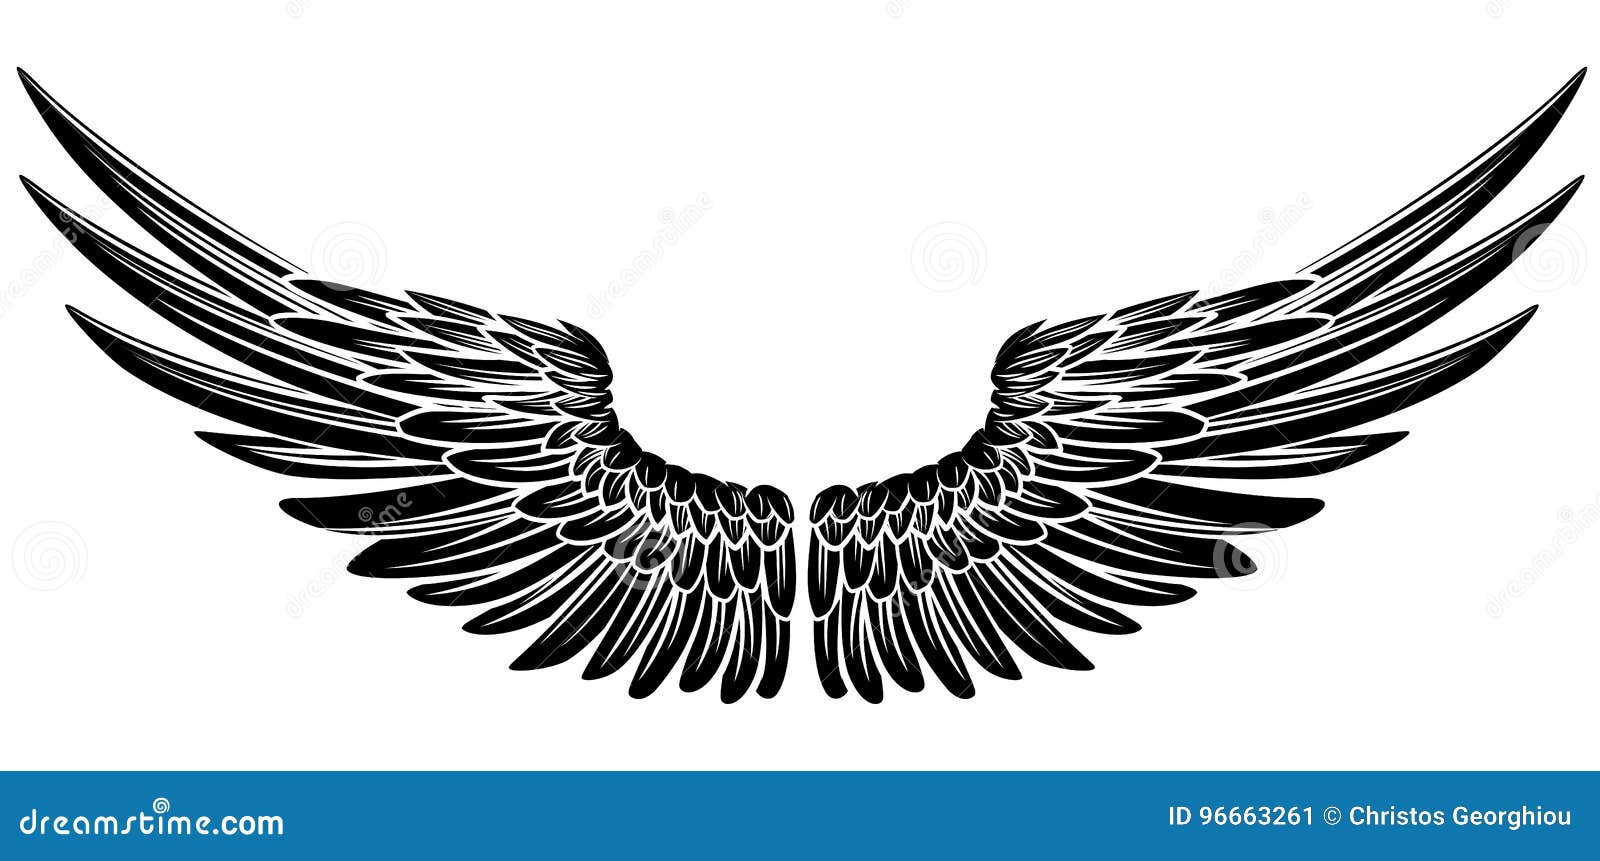 Illustration sketch of woman with eagle wings, made with digita -  Backgrounds & Textures - indivstock